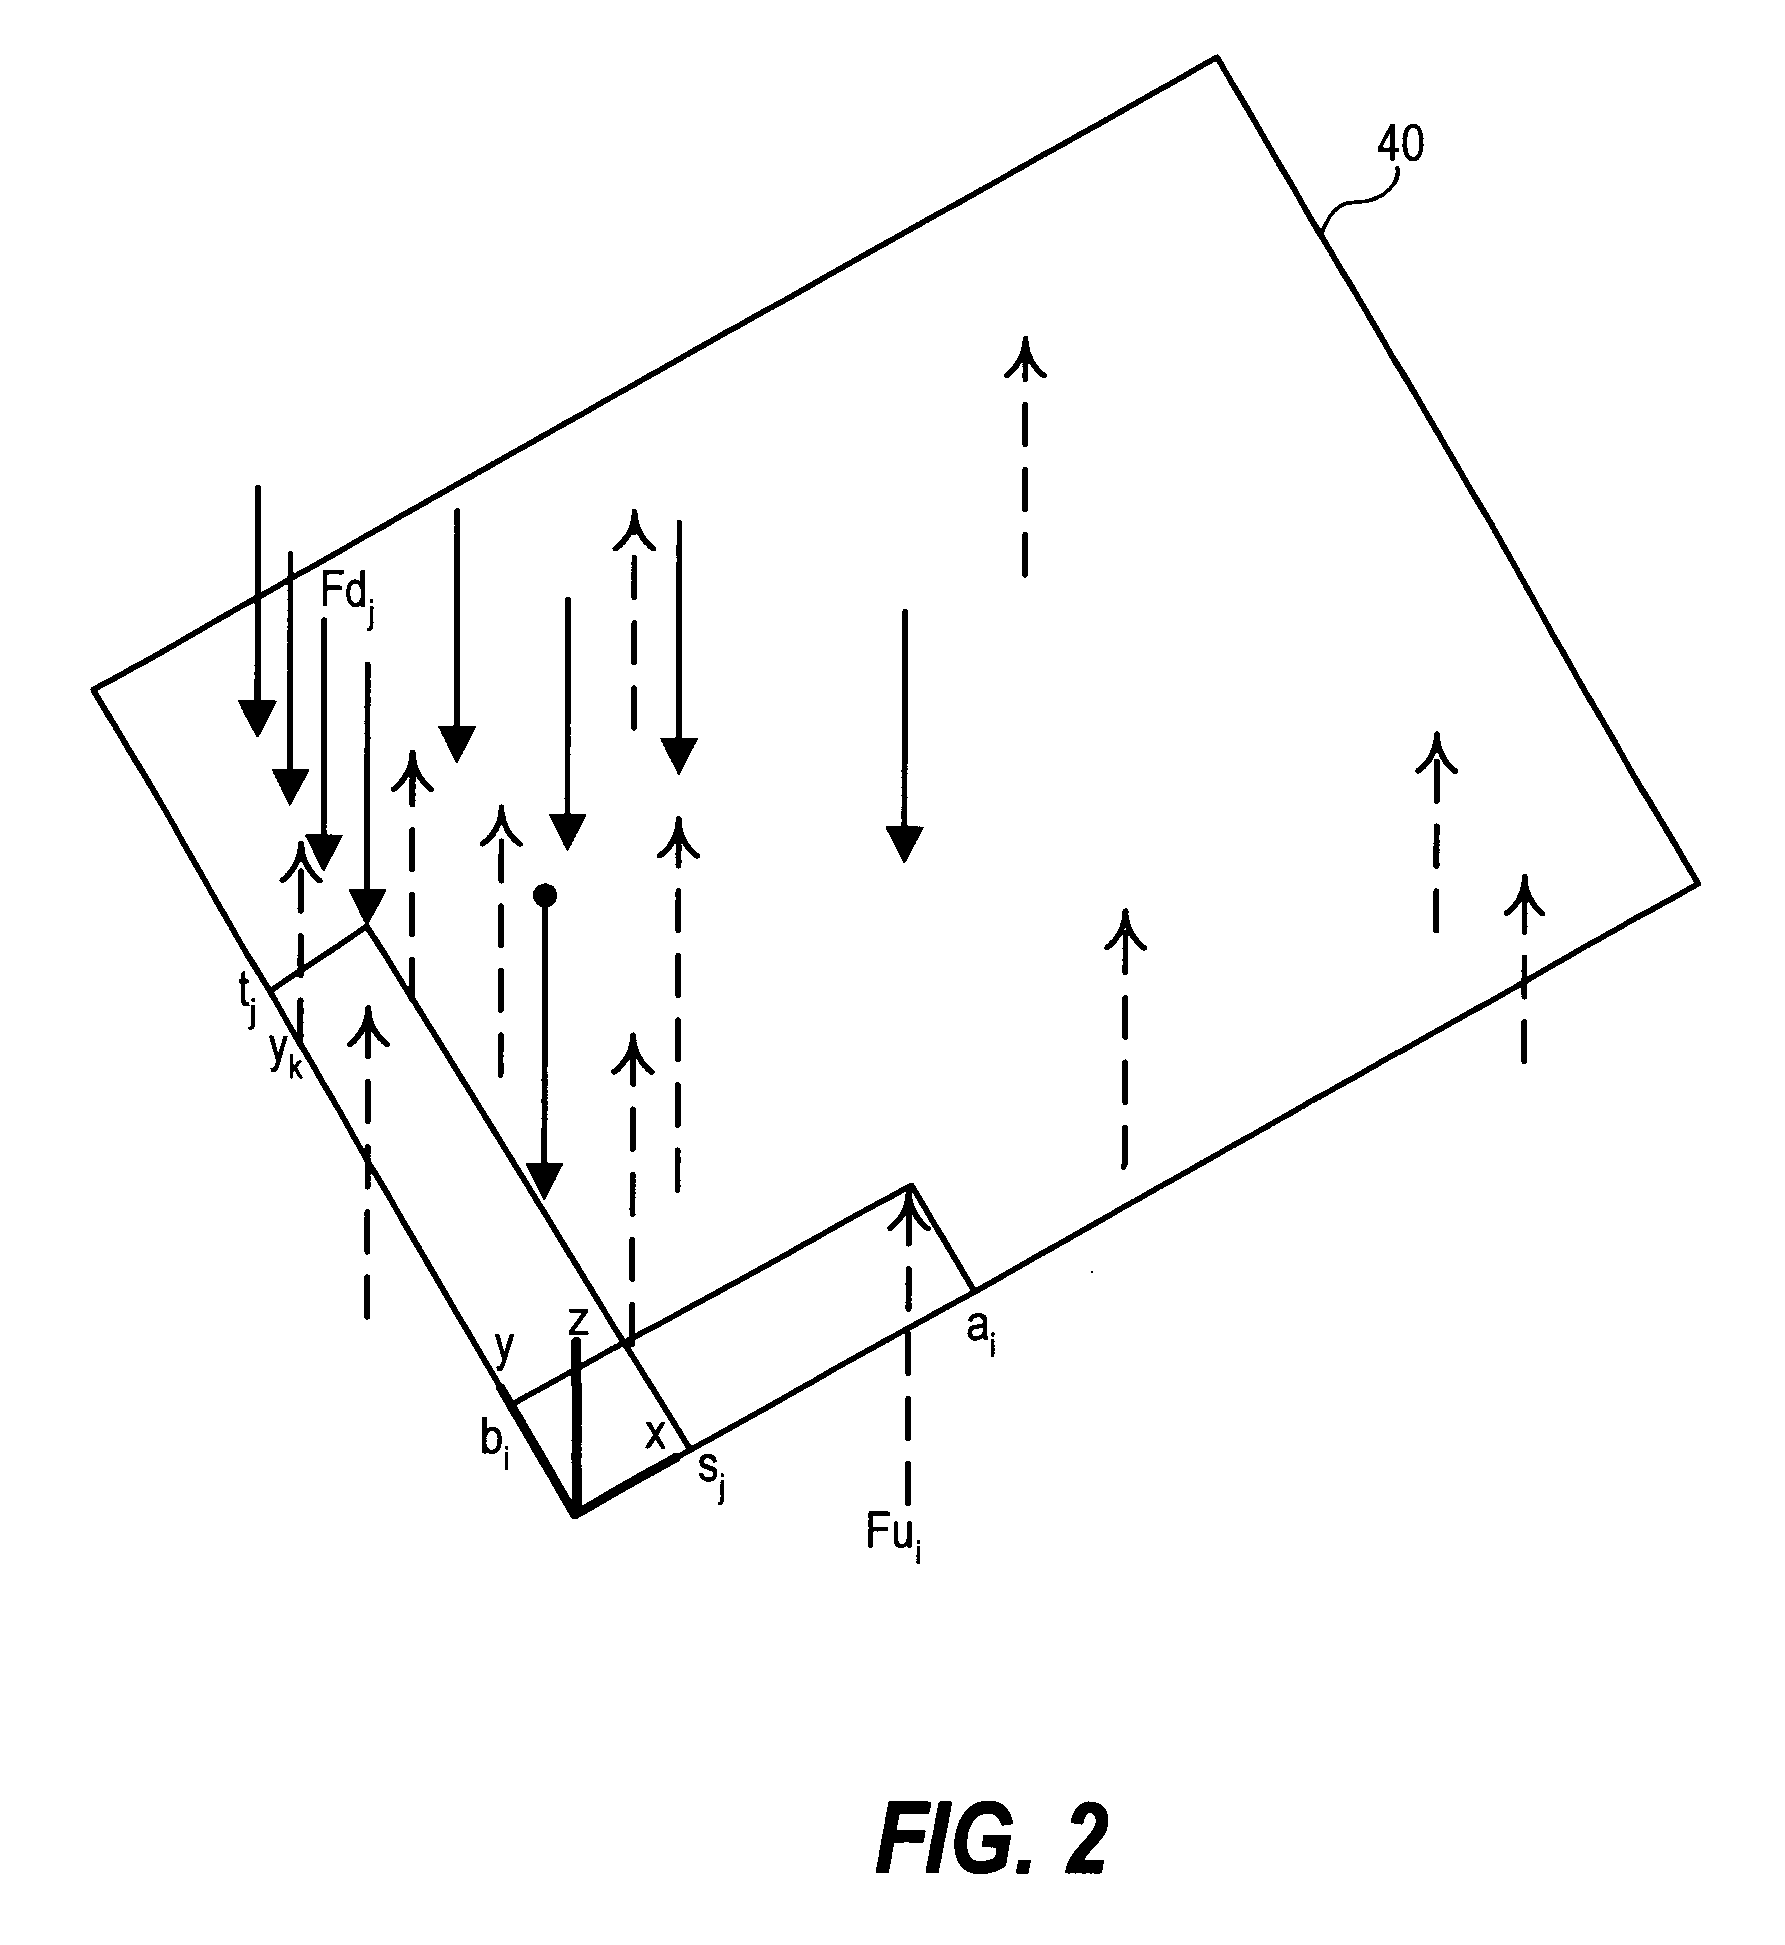 Method and apparatus for determining probing locations for a printed circuit board